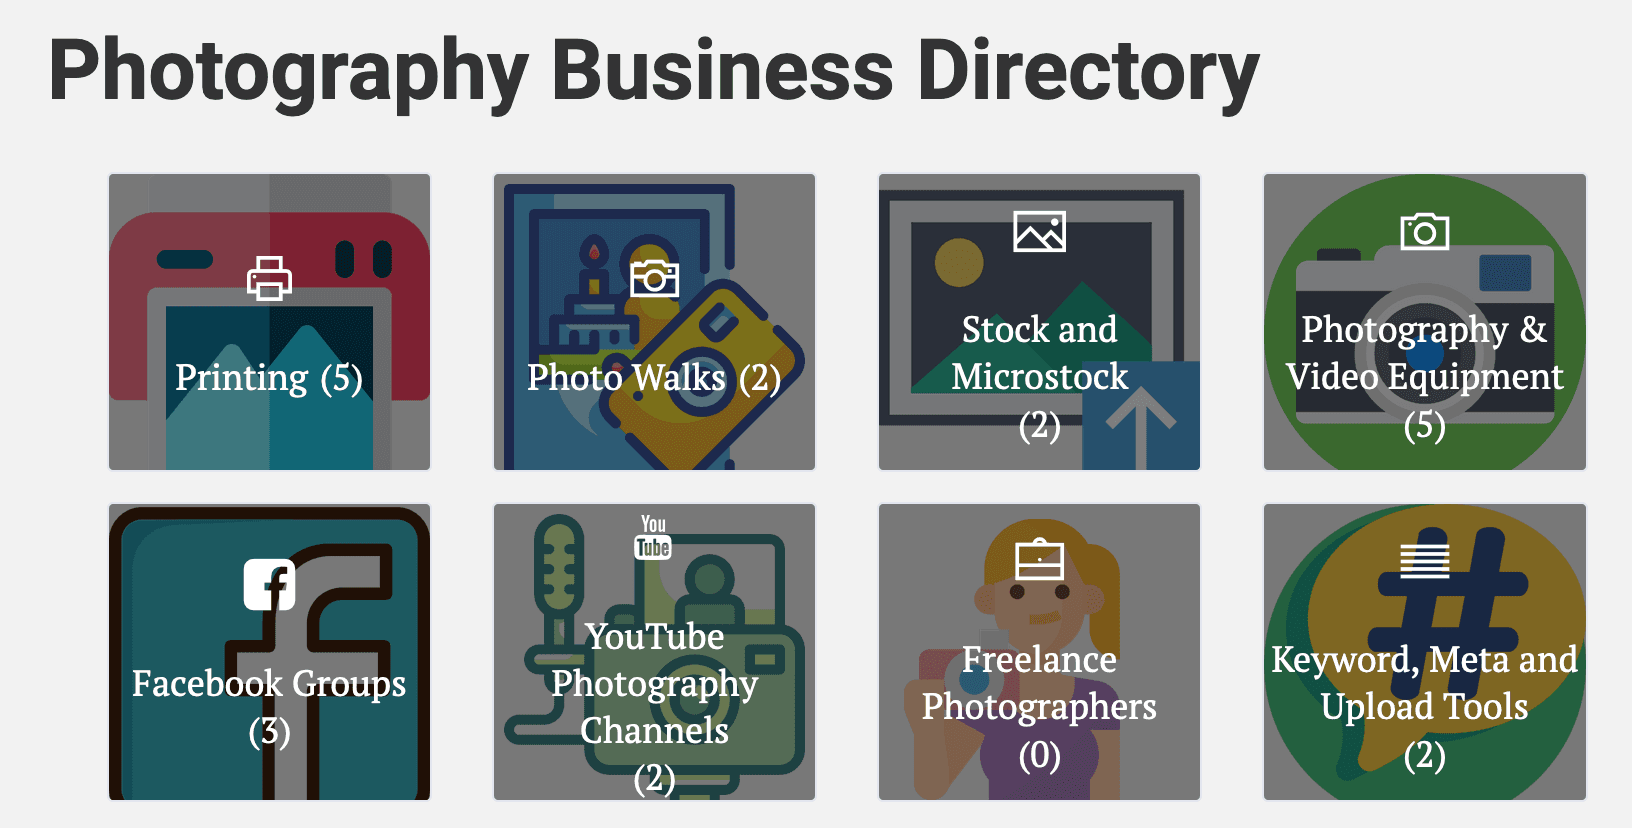 Photography Business Directory - Launched 2